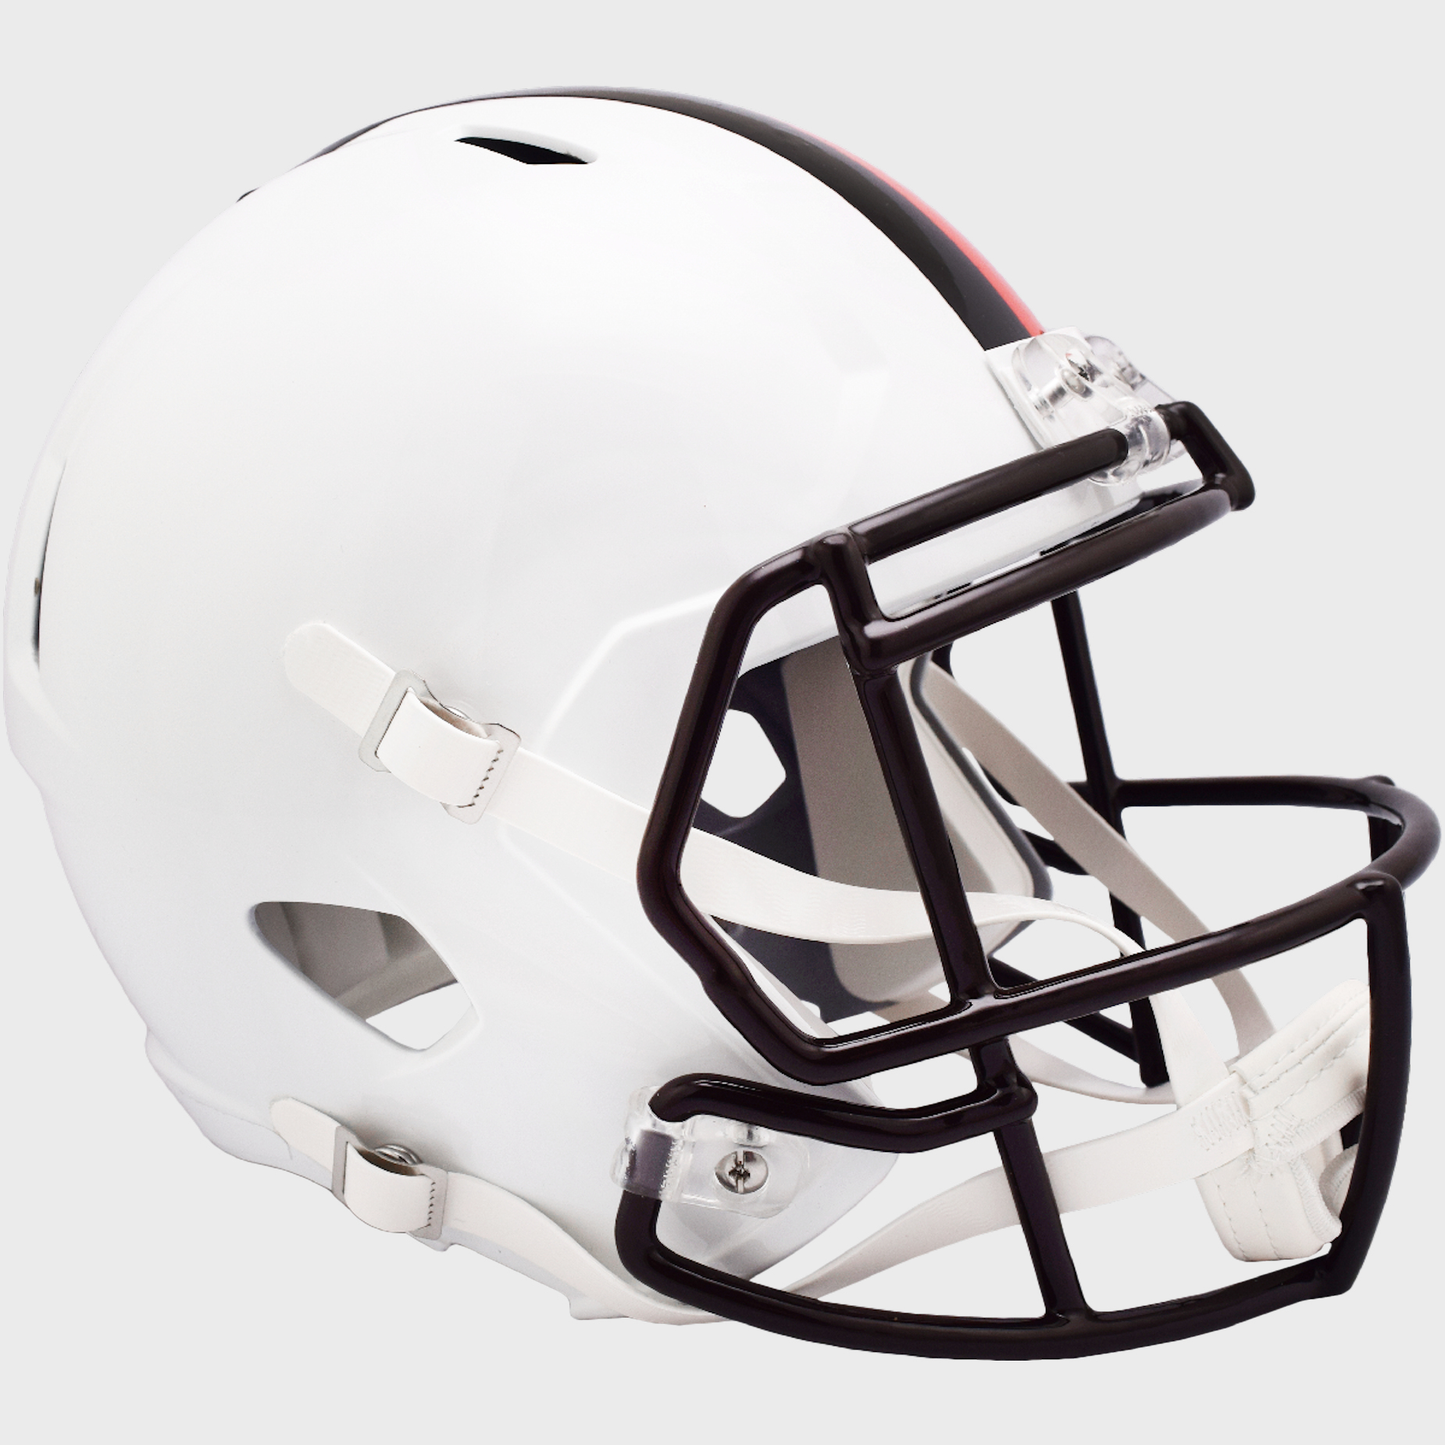 Cleveland Browns full size White Out replica helmet